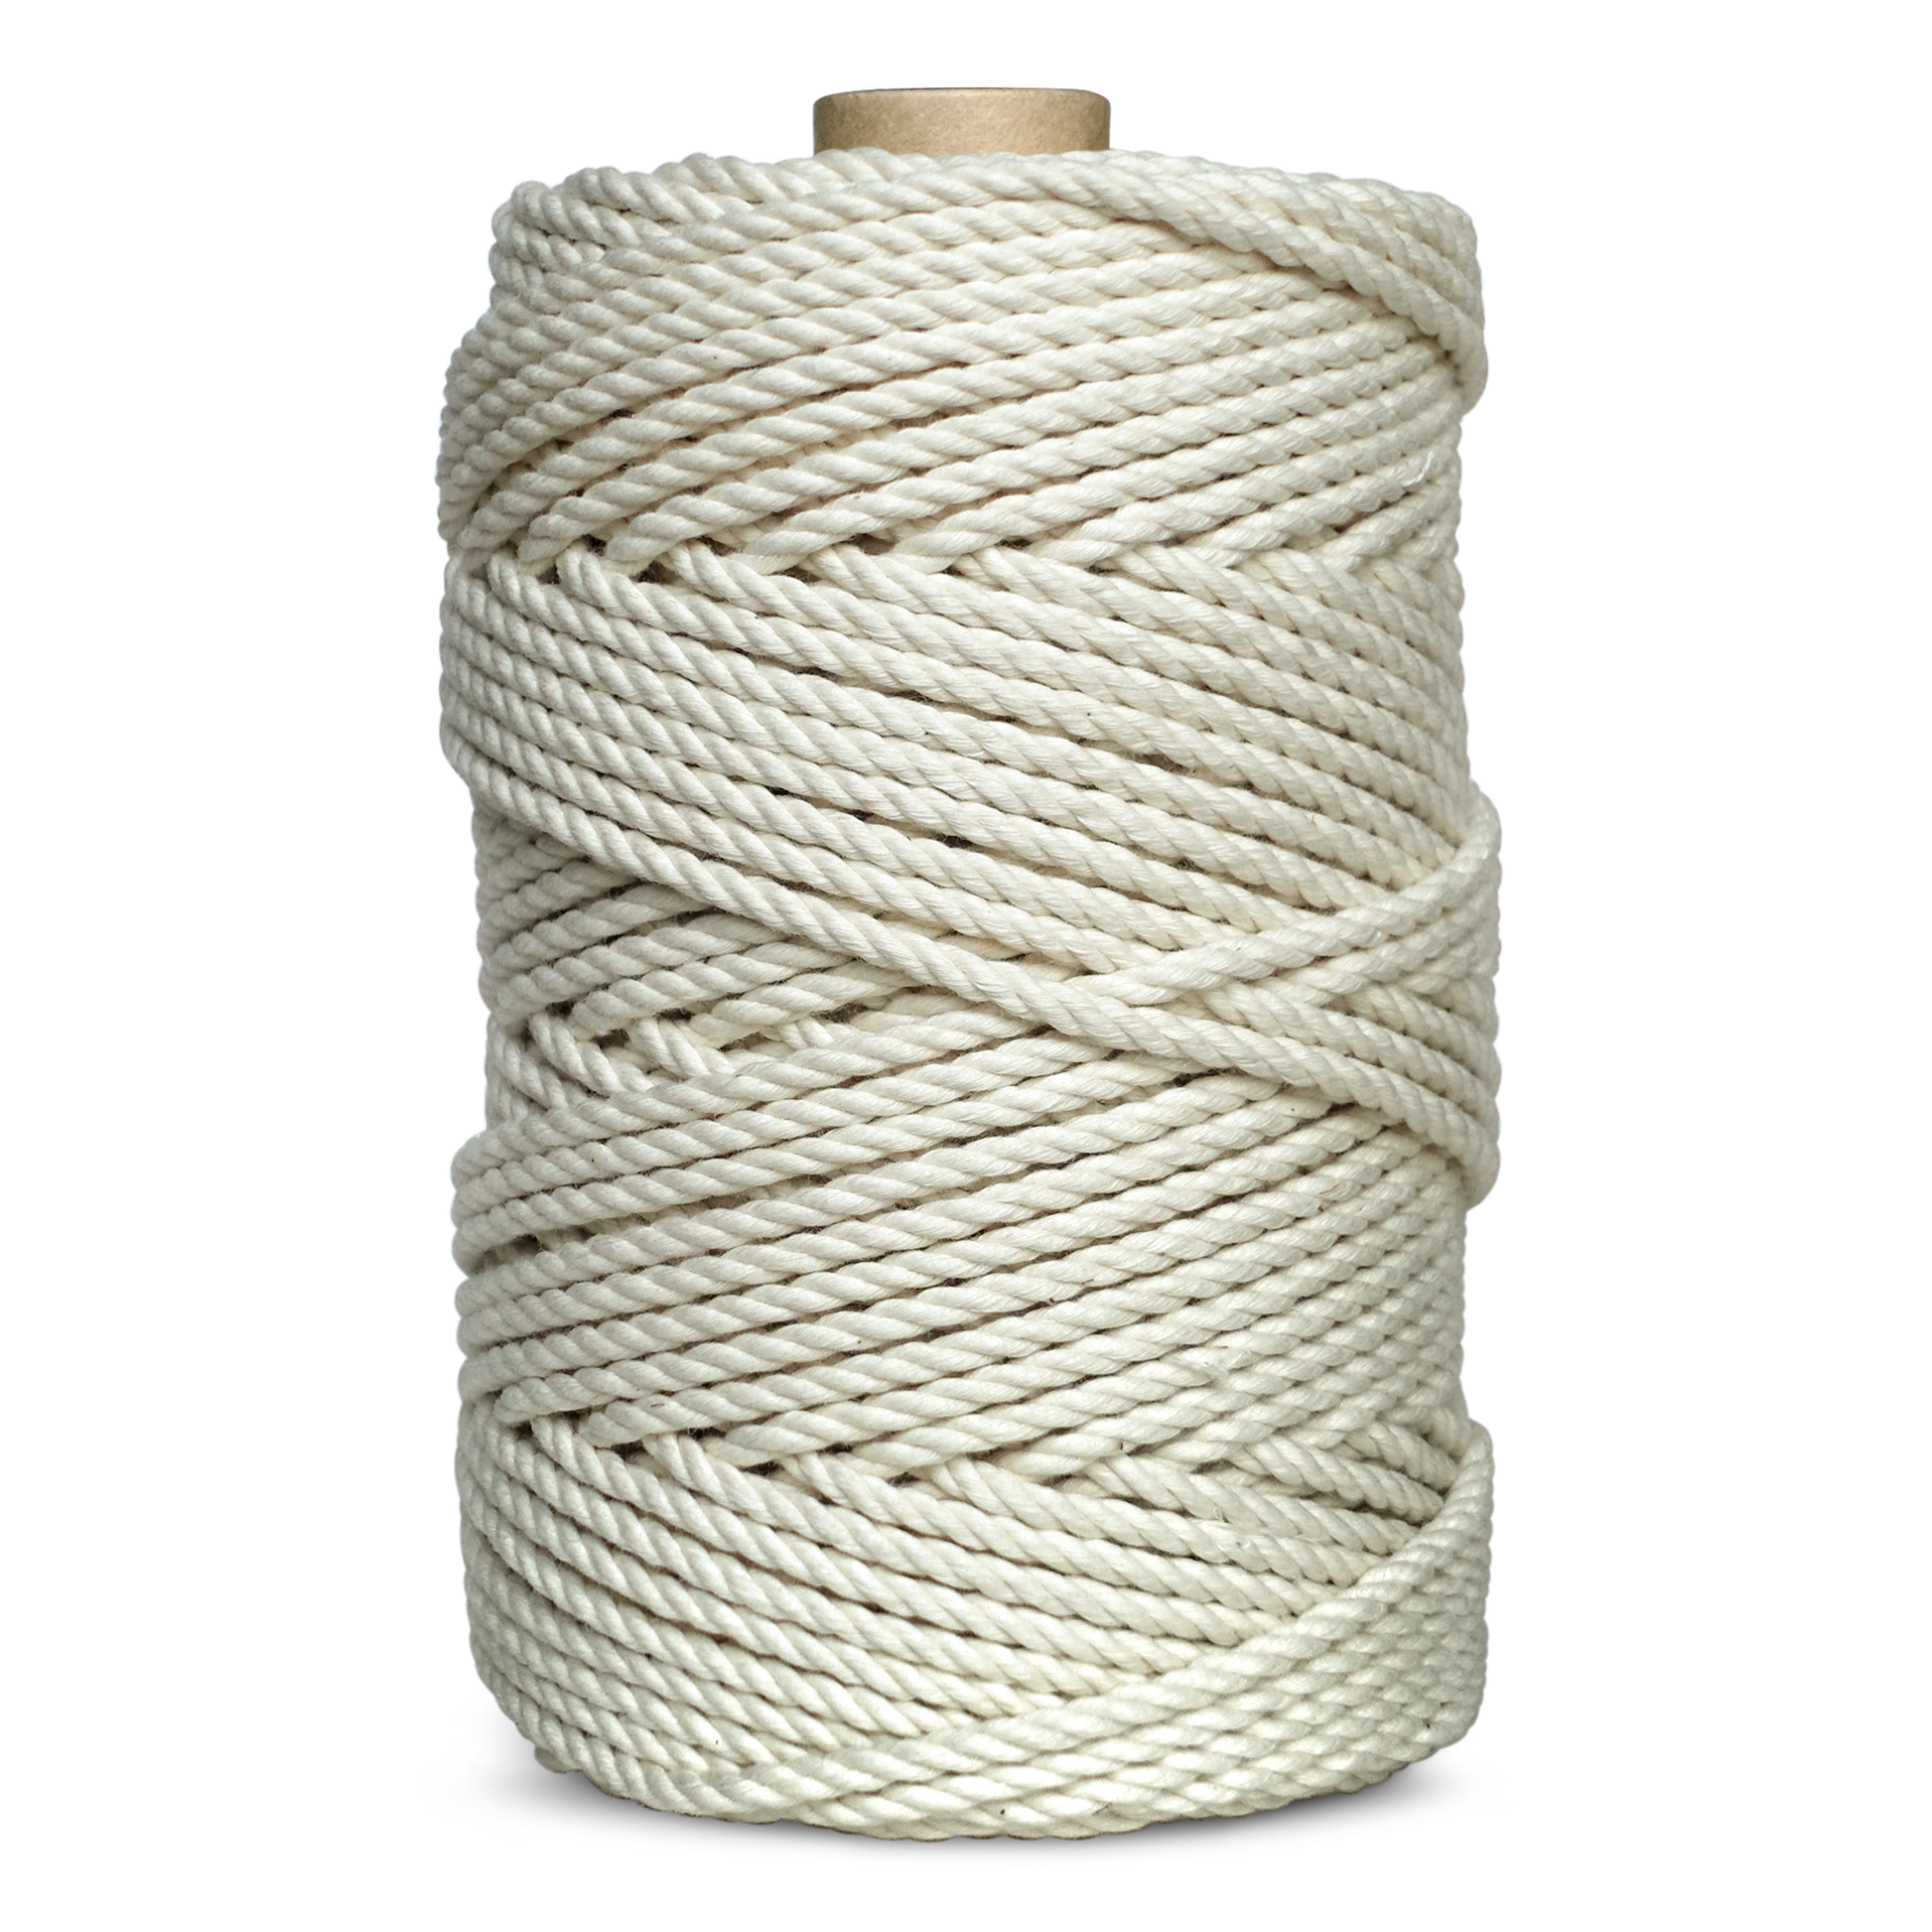 LET BE Macrame Cord 4mm x 110Yards, Easy Tutorial Videos, Premium Single  Strand Cotton Blend Cord Natural Color for Wall Decor, Wall Hanging Plant  and